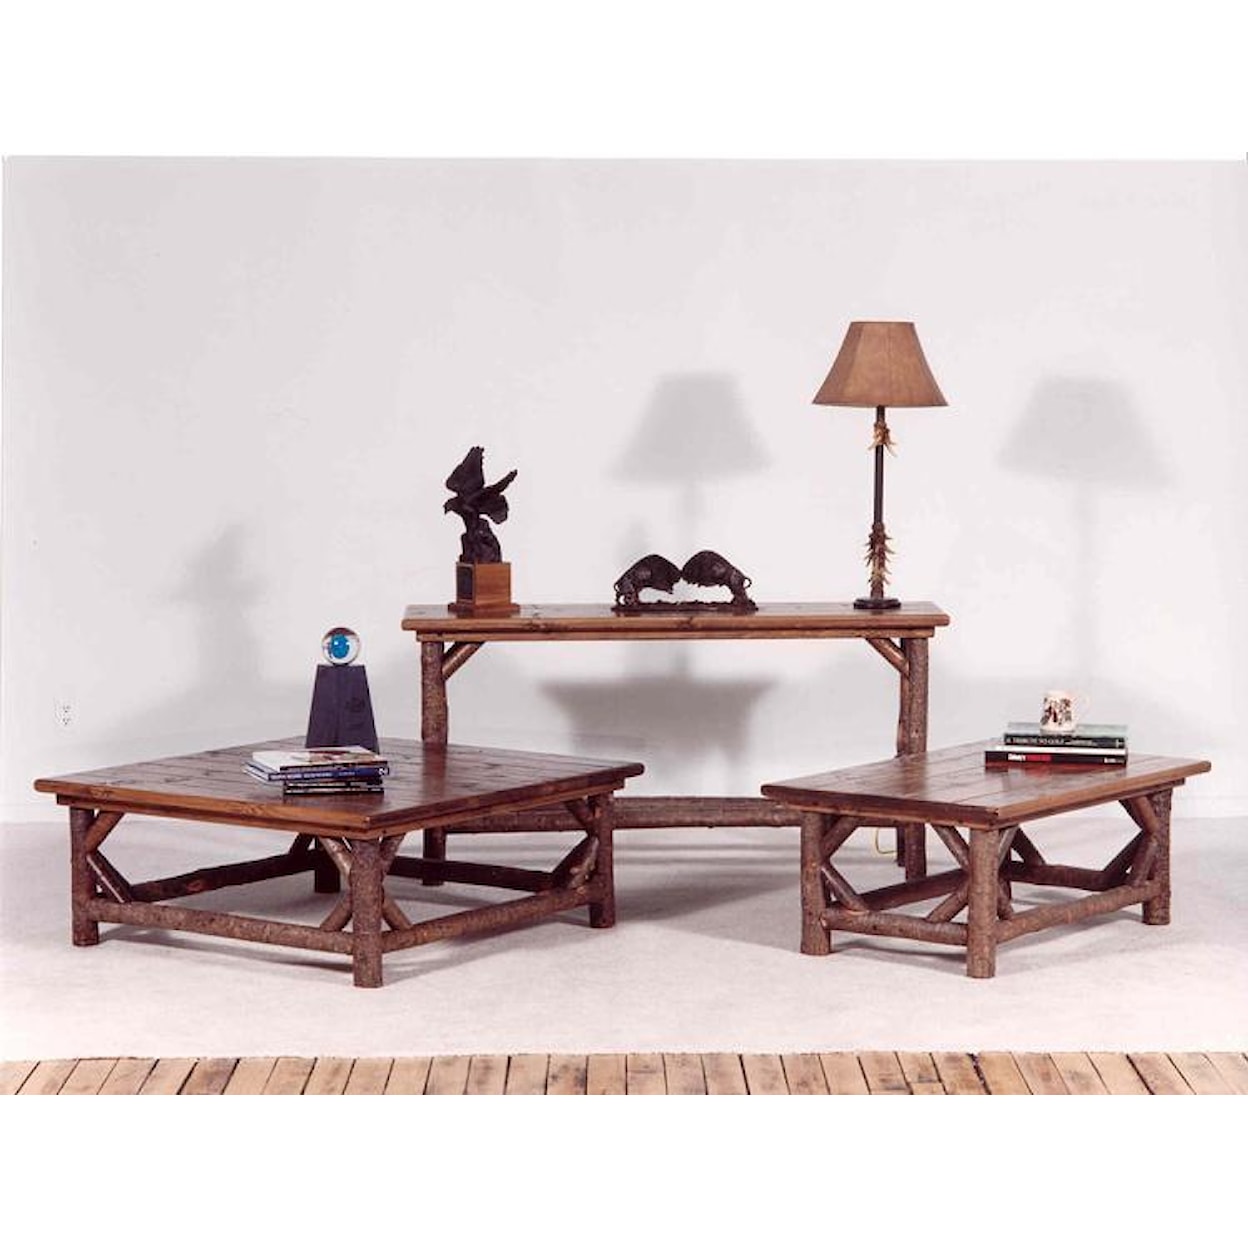 Marshfield Bayfield Tables Rectangle Coffee Table